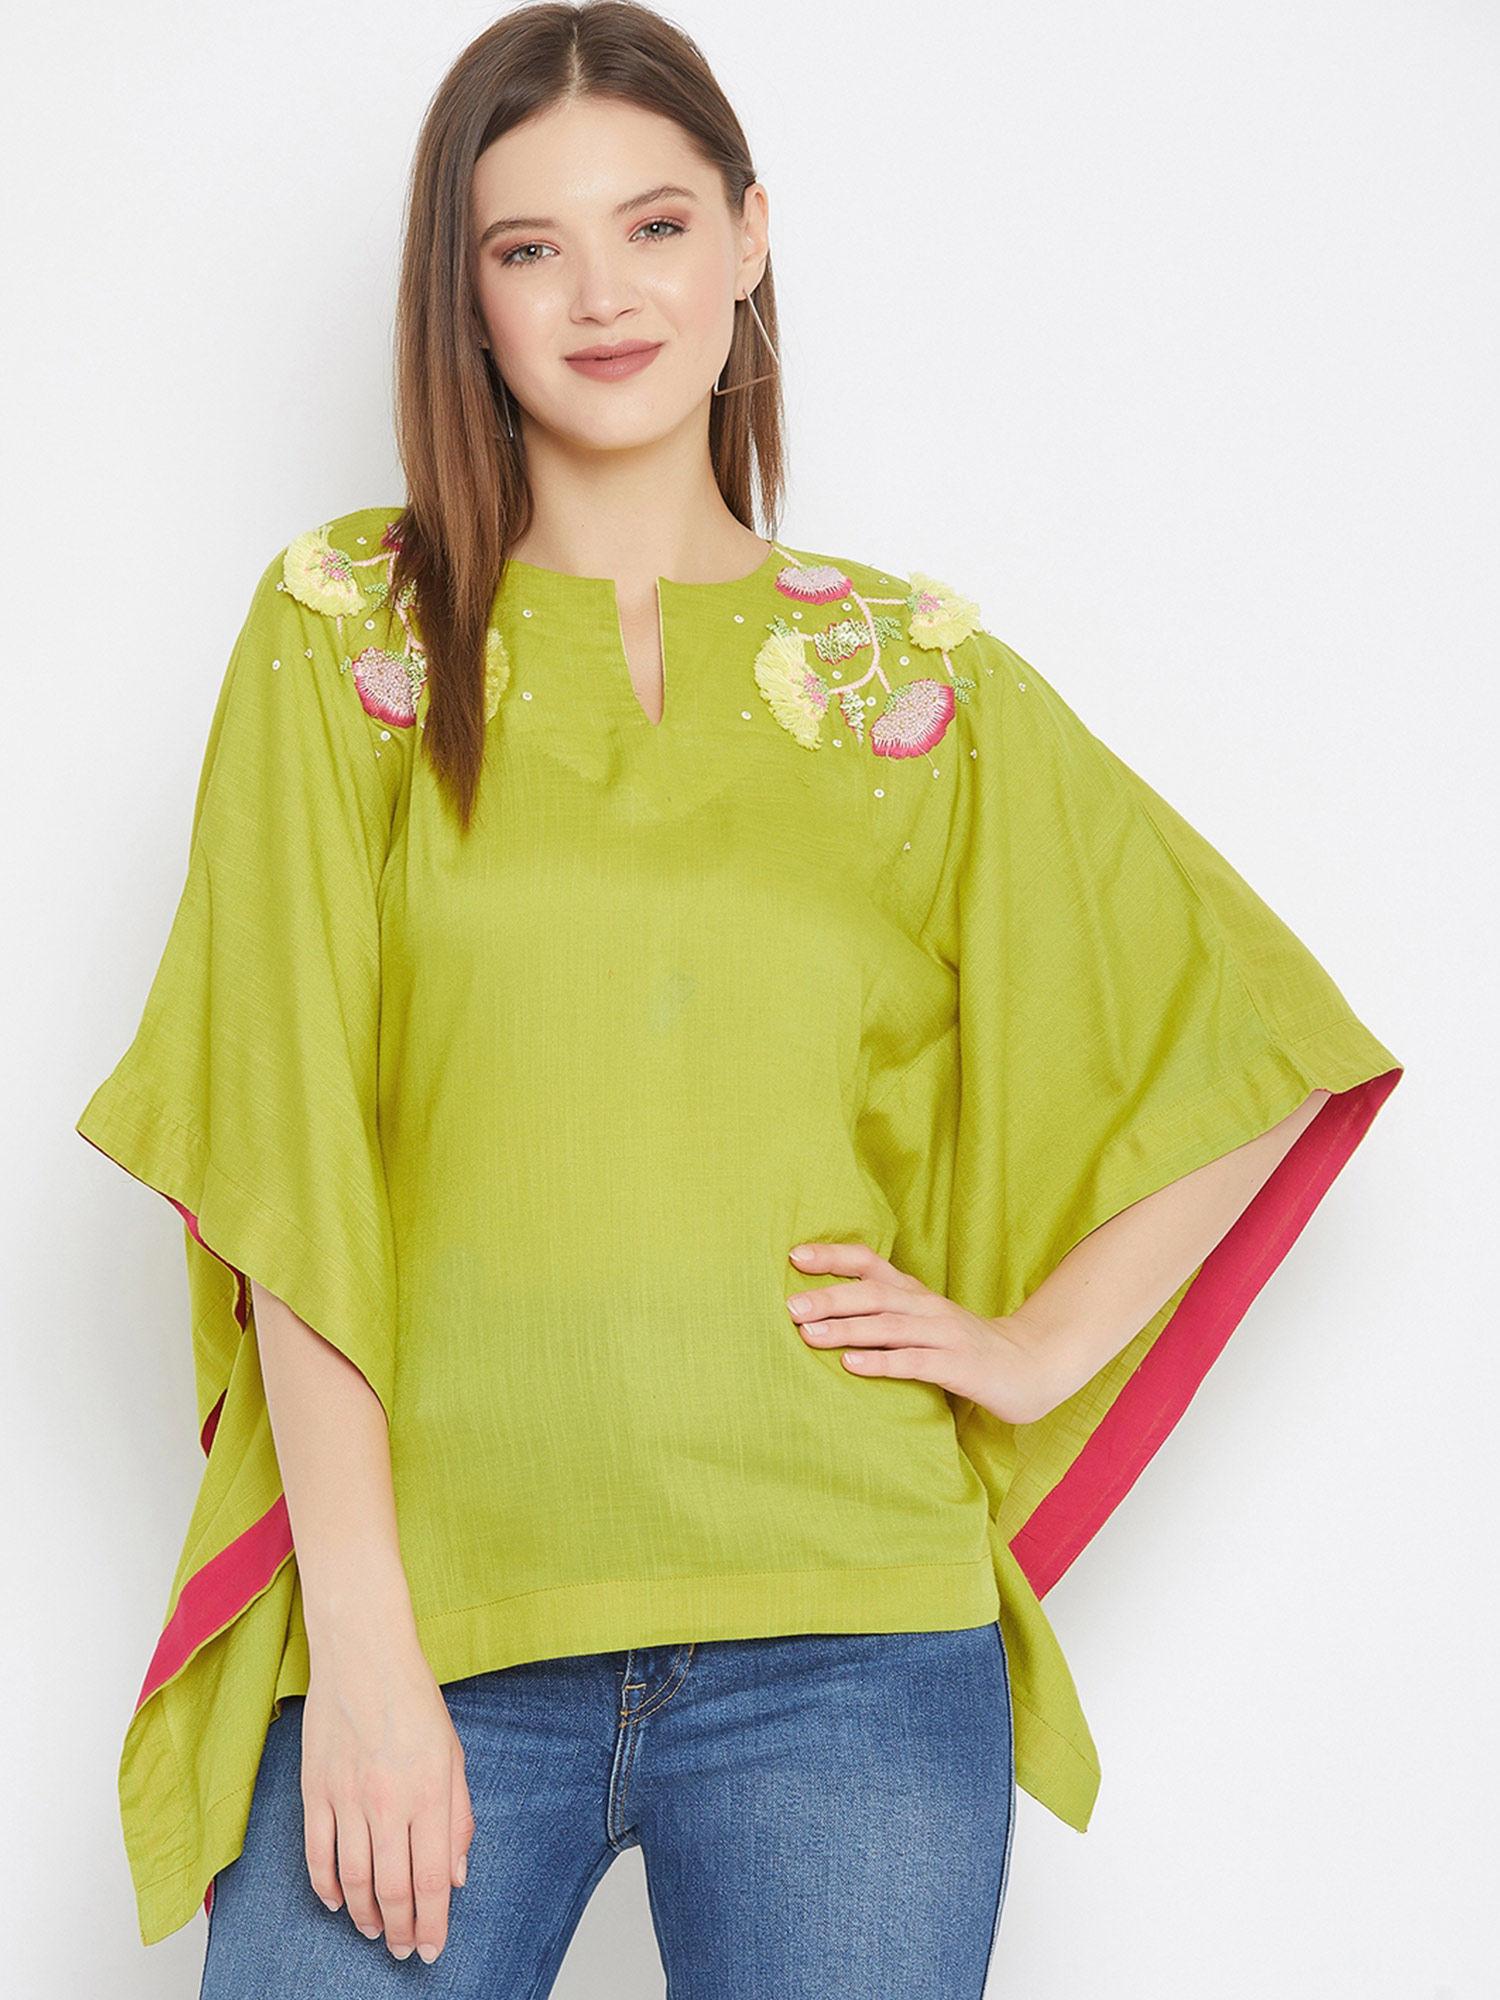 solid green kaftan top with floral hand embroidery